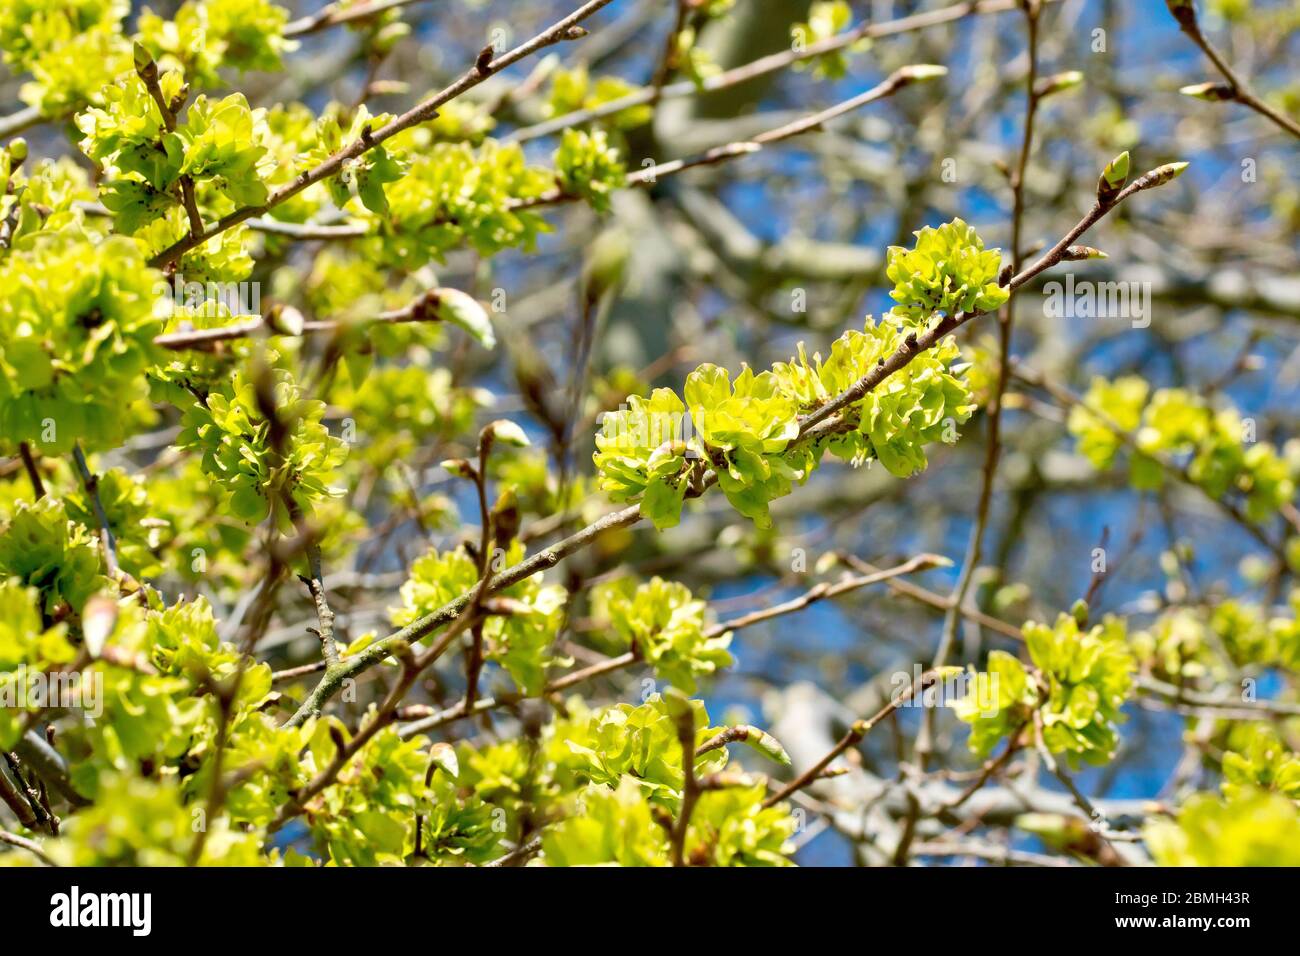 Wych Elm (ulmus glabra), the branches of a tree covered in fresh green seed pods in the spring sunshine. Stock Photo